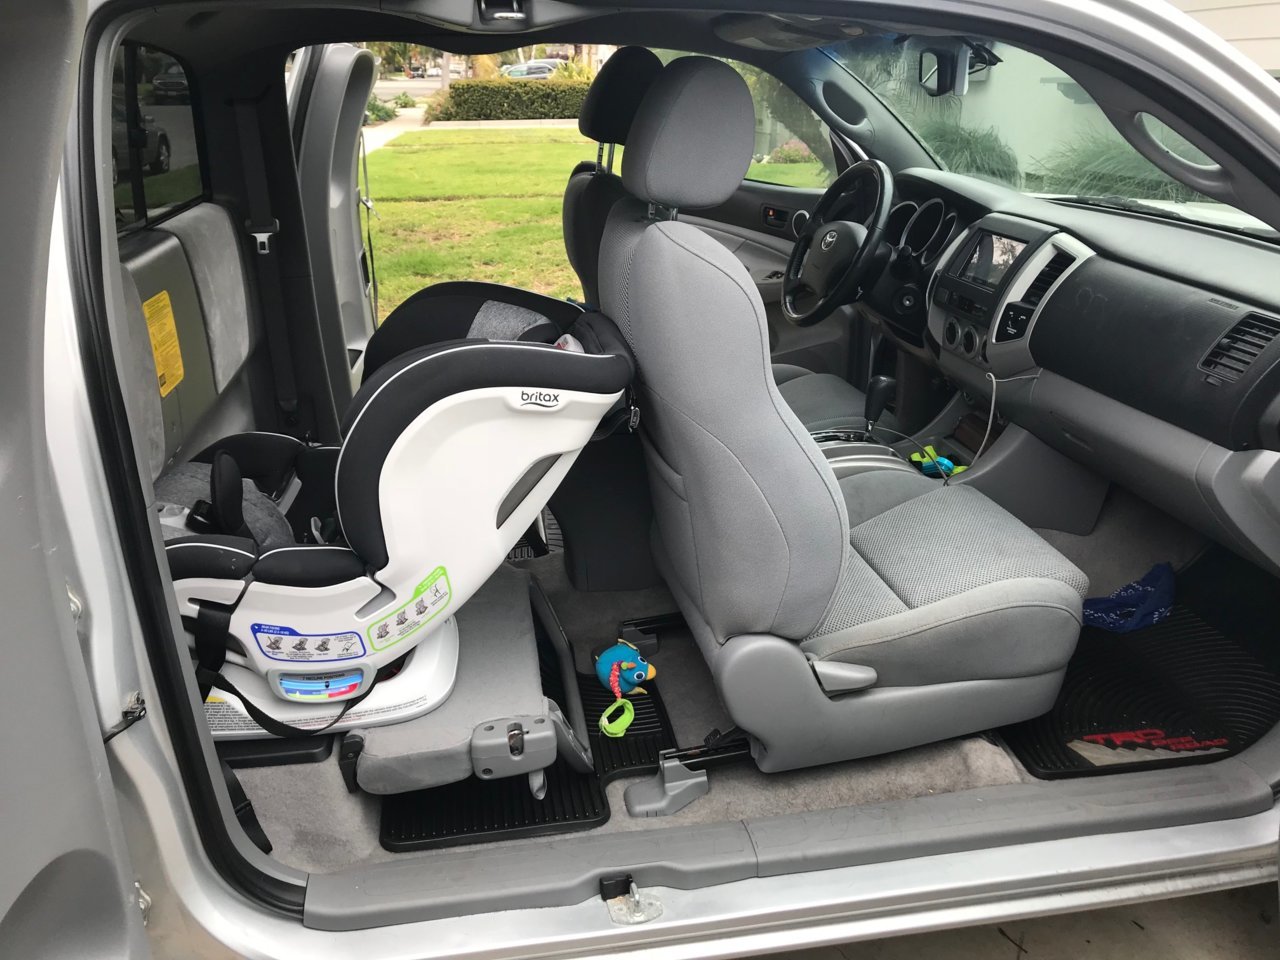 Rear Facing Car Seat In Access Cab, Can You Put Car Seat In Extended Cab